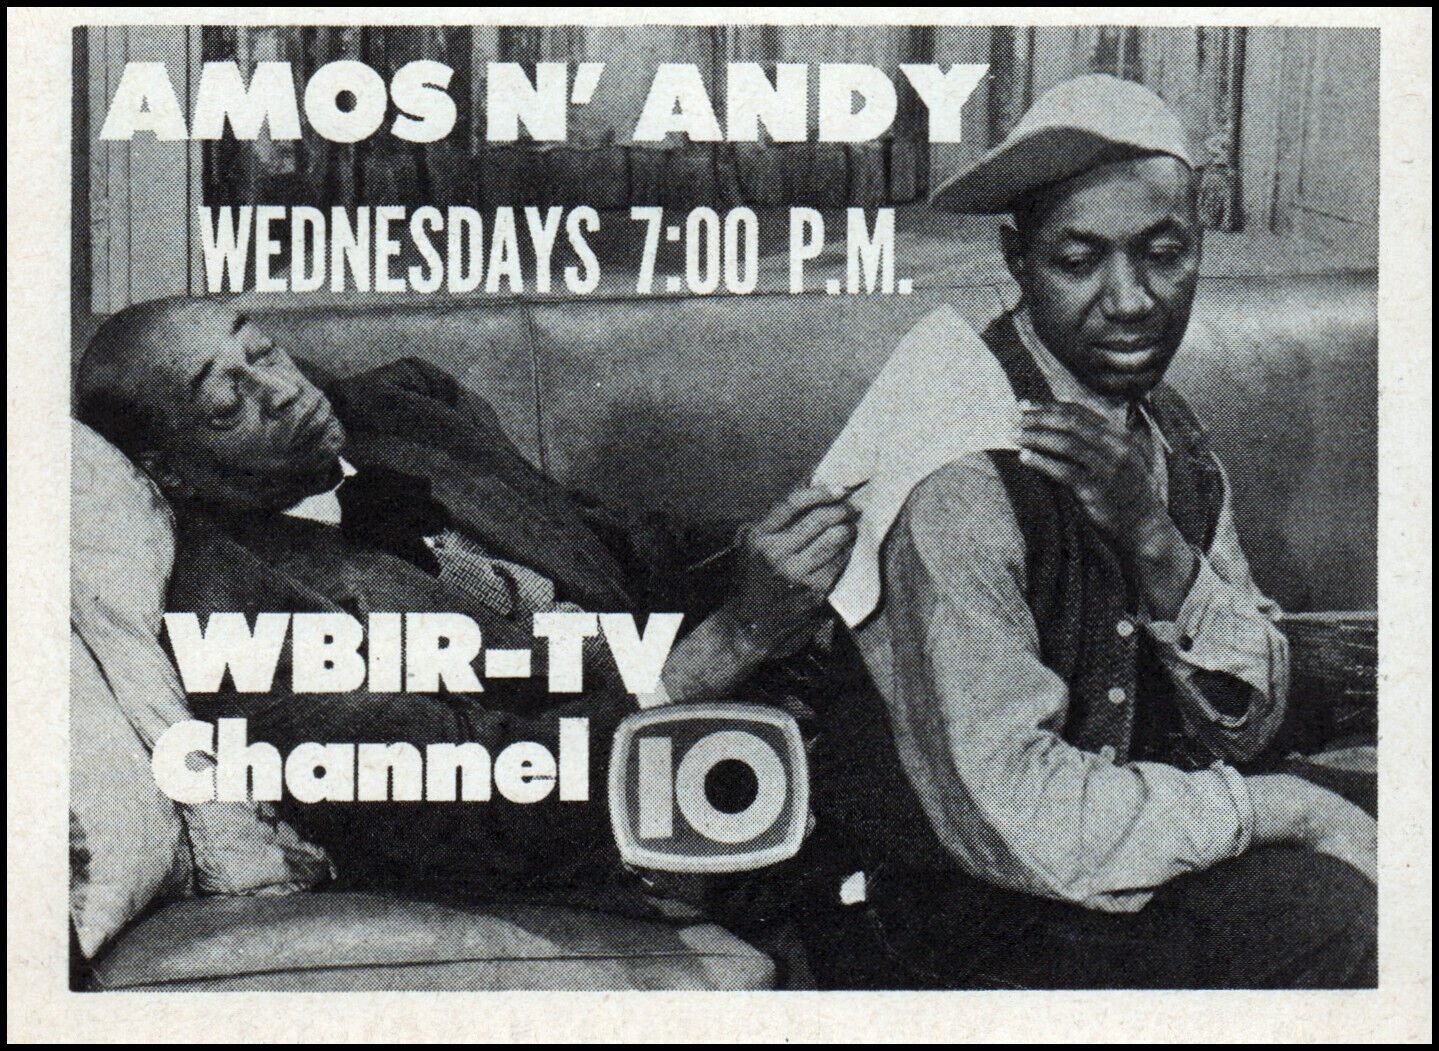 1965 Amos N' Andy Show on WBIR-TV Knoxville Tennessee promo print ad  TV9